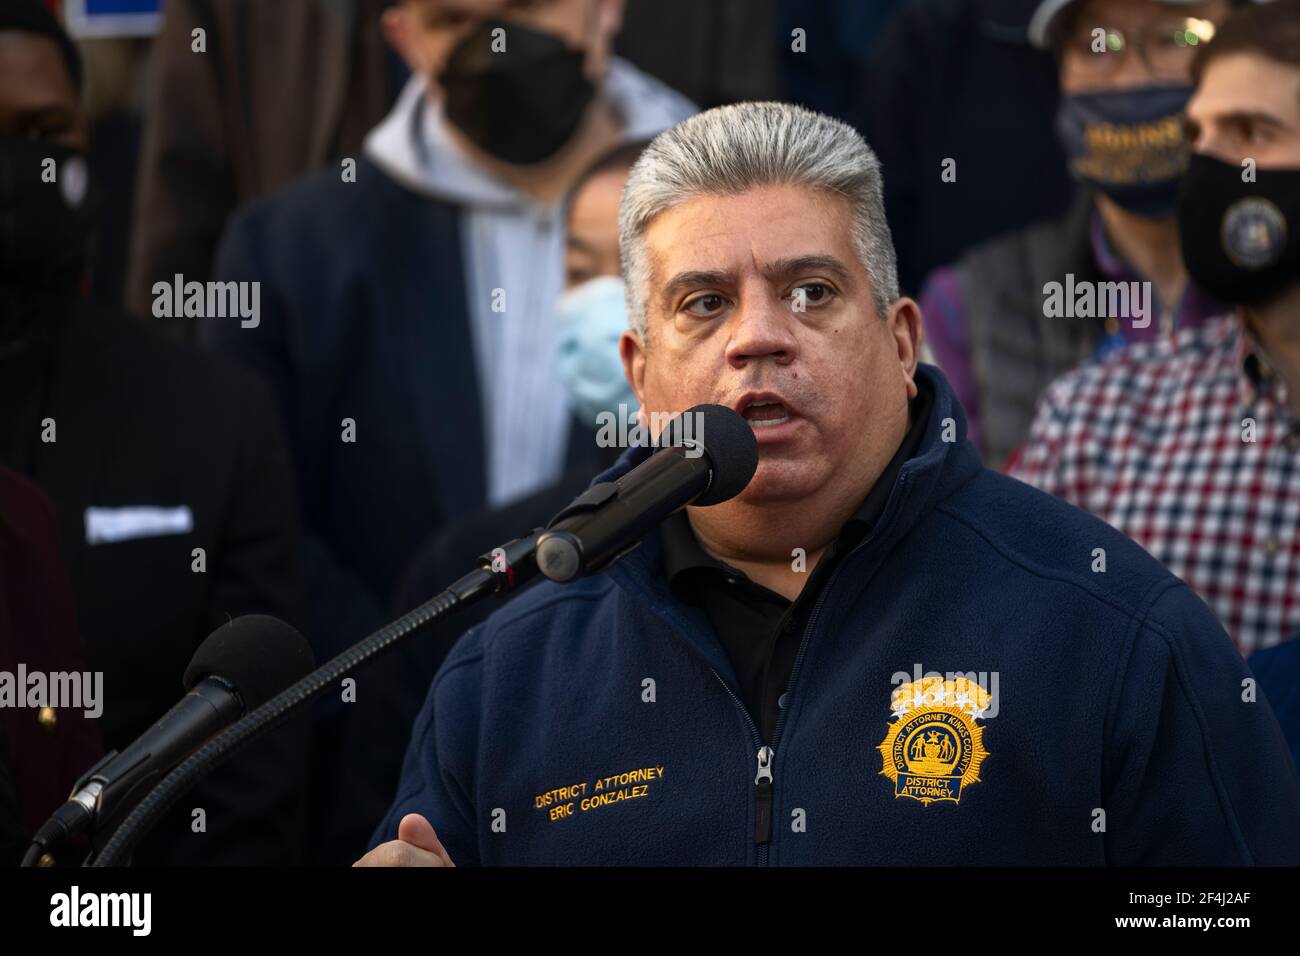 Brooklyn, New York, USA. 21 March 2021 Kings County (Brooklyn) District Attorney Eric Gonzalez speaks during rally against violence and discrimination after recent attacks against Asian-Americans in New York City and across the U.S. during the COVID-19 pandemic. Credit: Joseph Reid/Alamy Live News Stock Photo